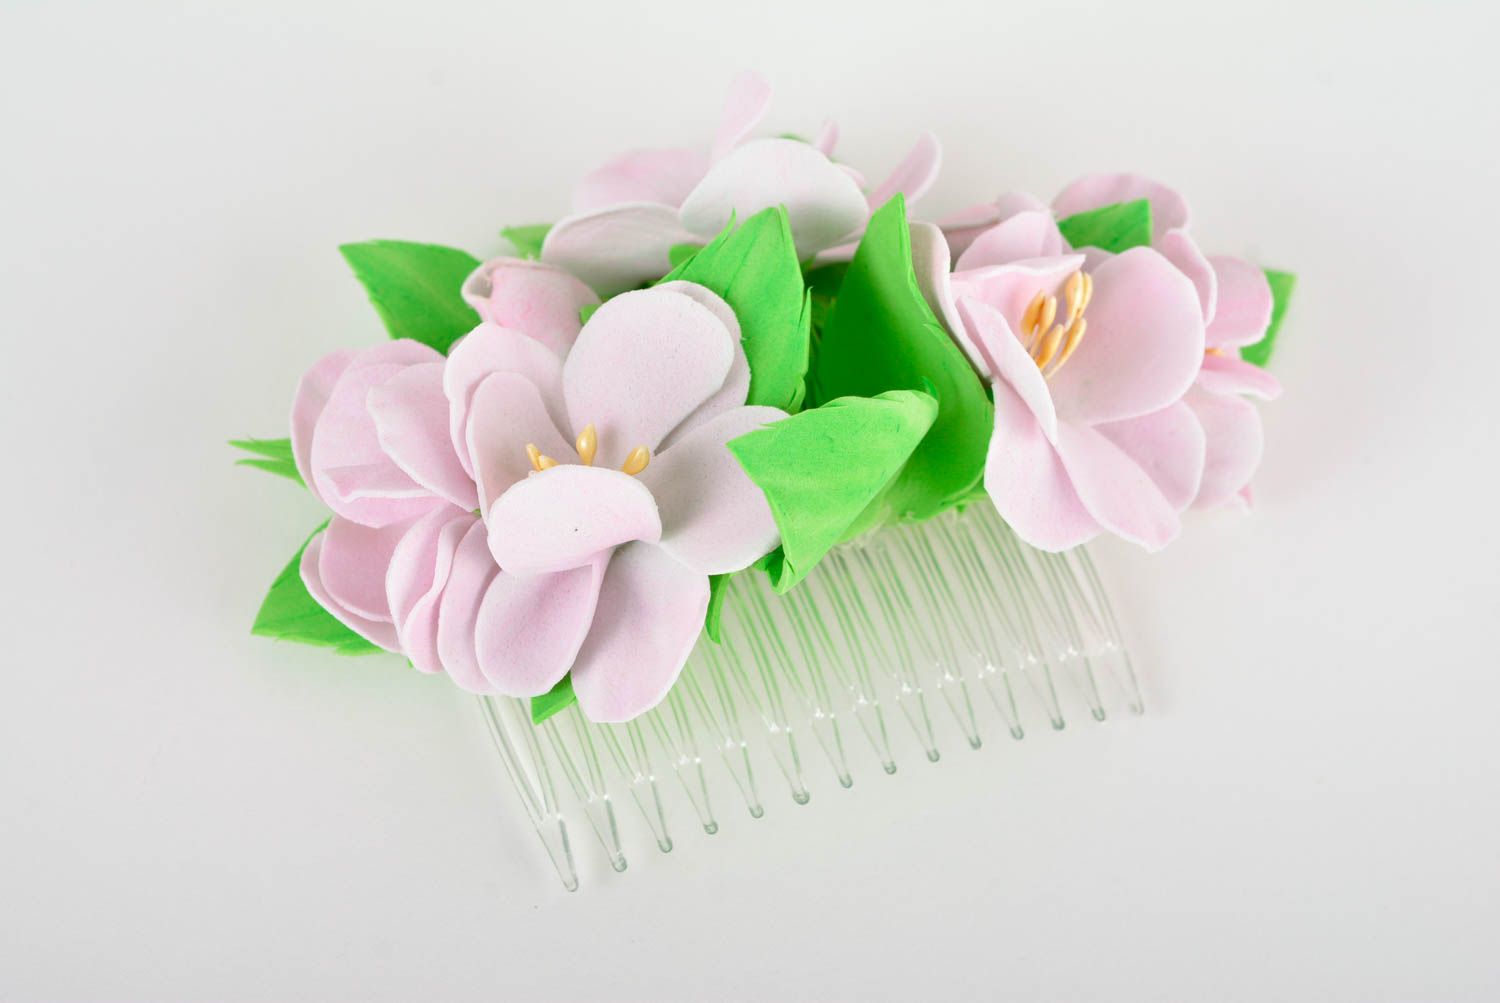 Handmade hair accessories designer hair comb with flowers stylish barrette photo 2